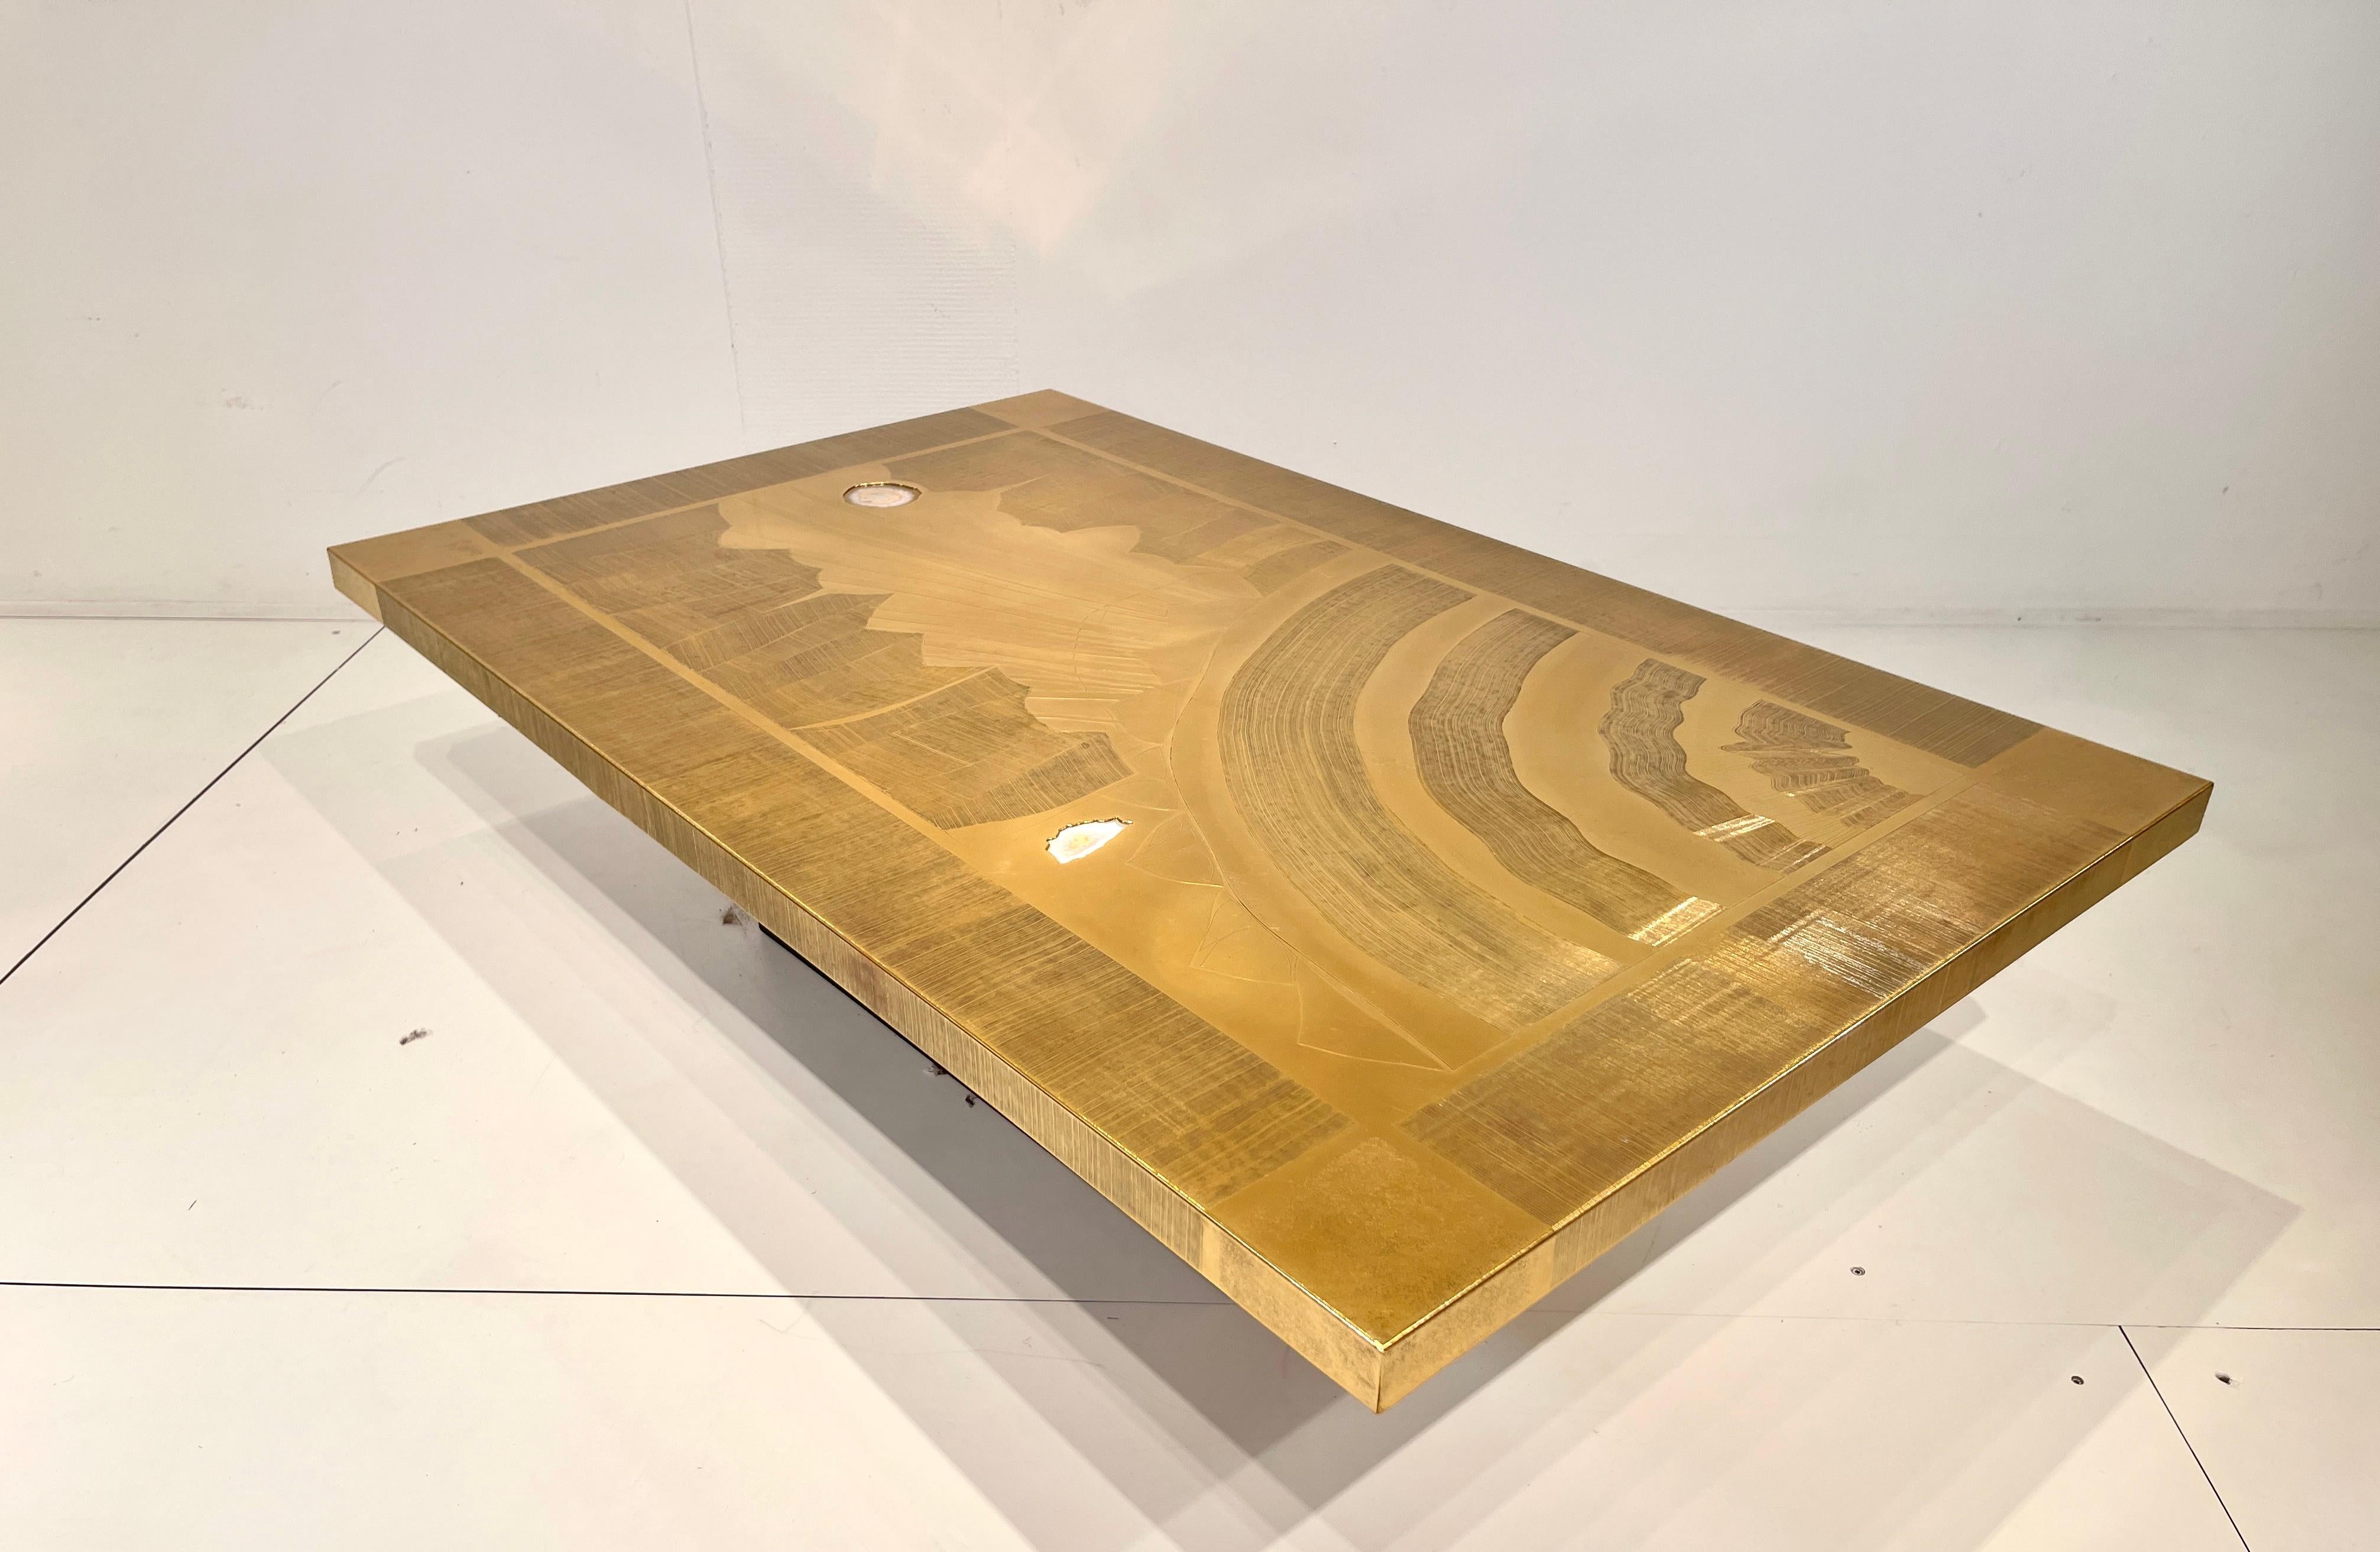 Mid-Century Modern Christian Krekels Etched Brass Coffee Table Inlaid 2 Agates, circa 1977 For Sale